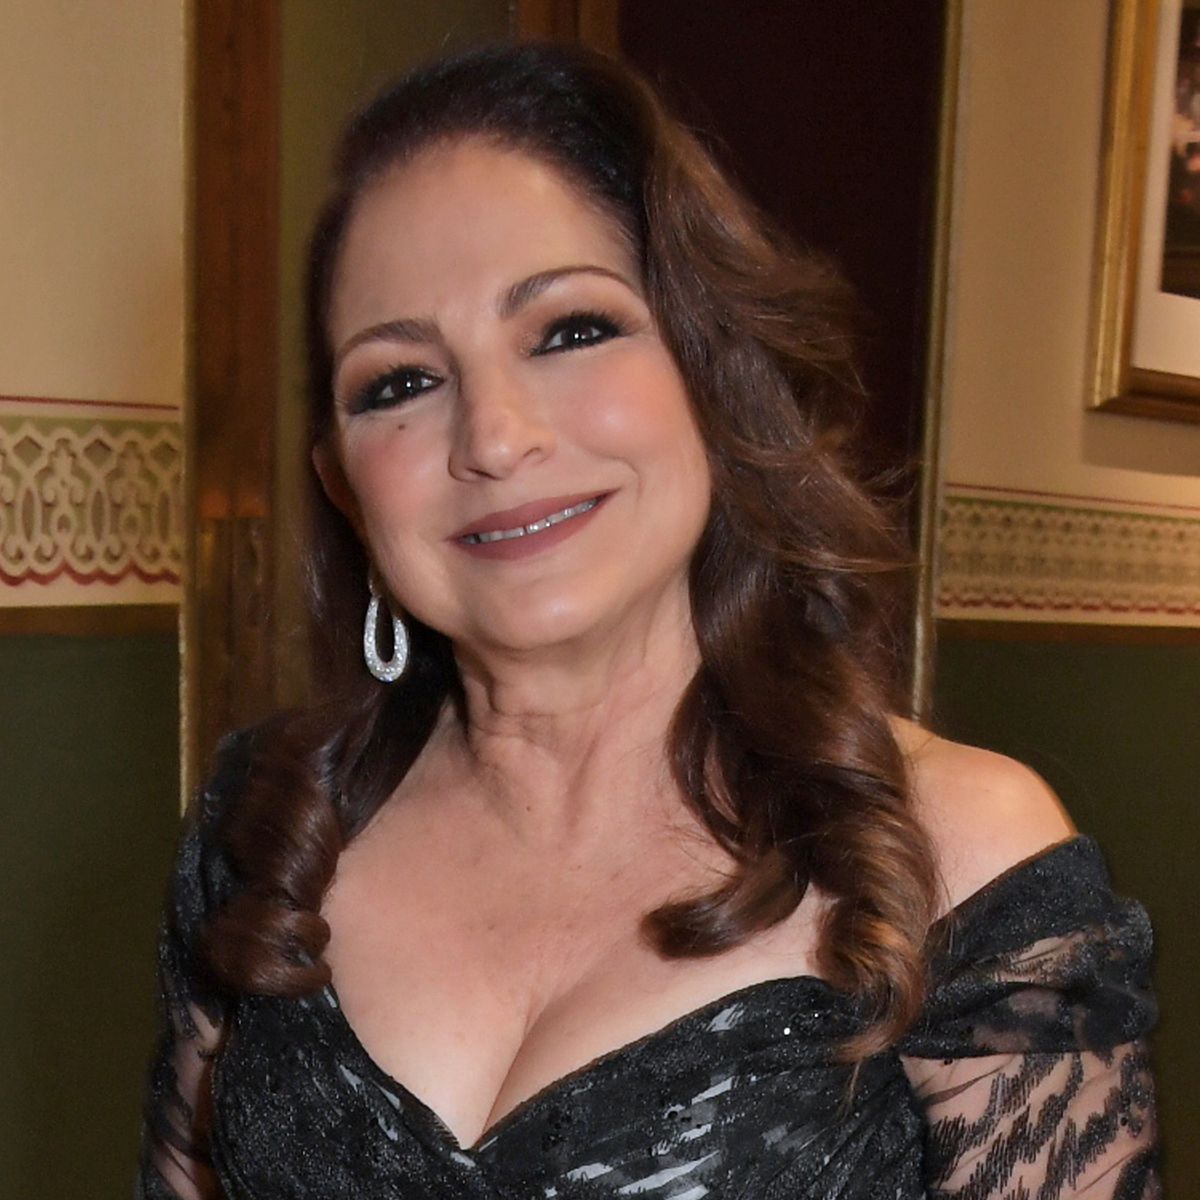 The Olivier Awards 2019 with Mastercard - VIP ArrivalsLONDON, ENGLAND - APRIL 07: Gloria Estefan attends The Olivier Awards 2019 with Mastercard at The Royal Albert Hall on April 7, 2019 in London, England. (Photo by David M. Benett/Dave Benett/Getty Images)